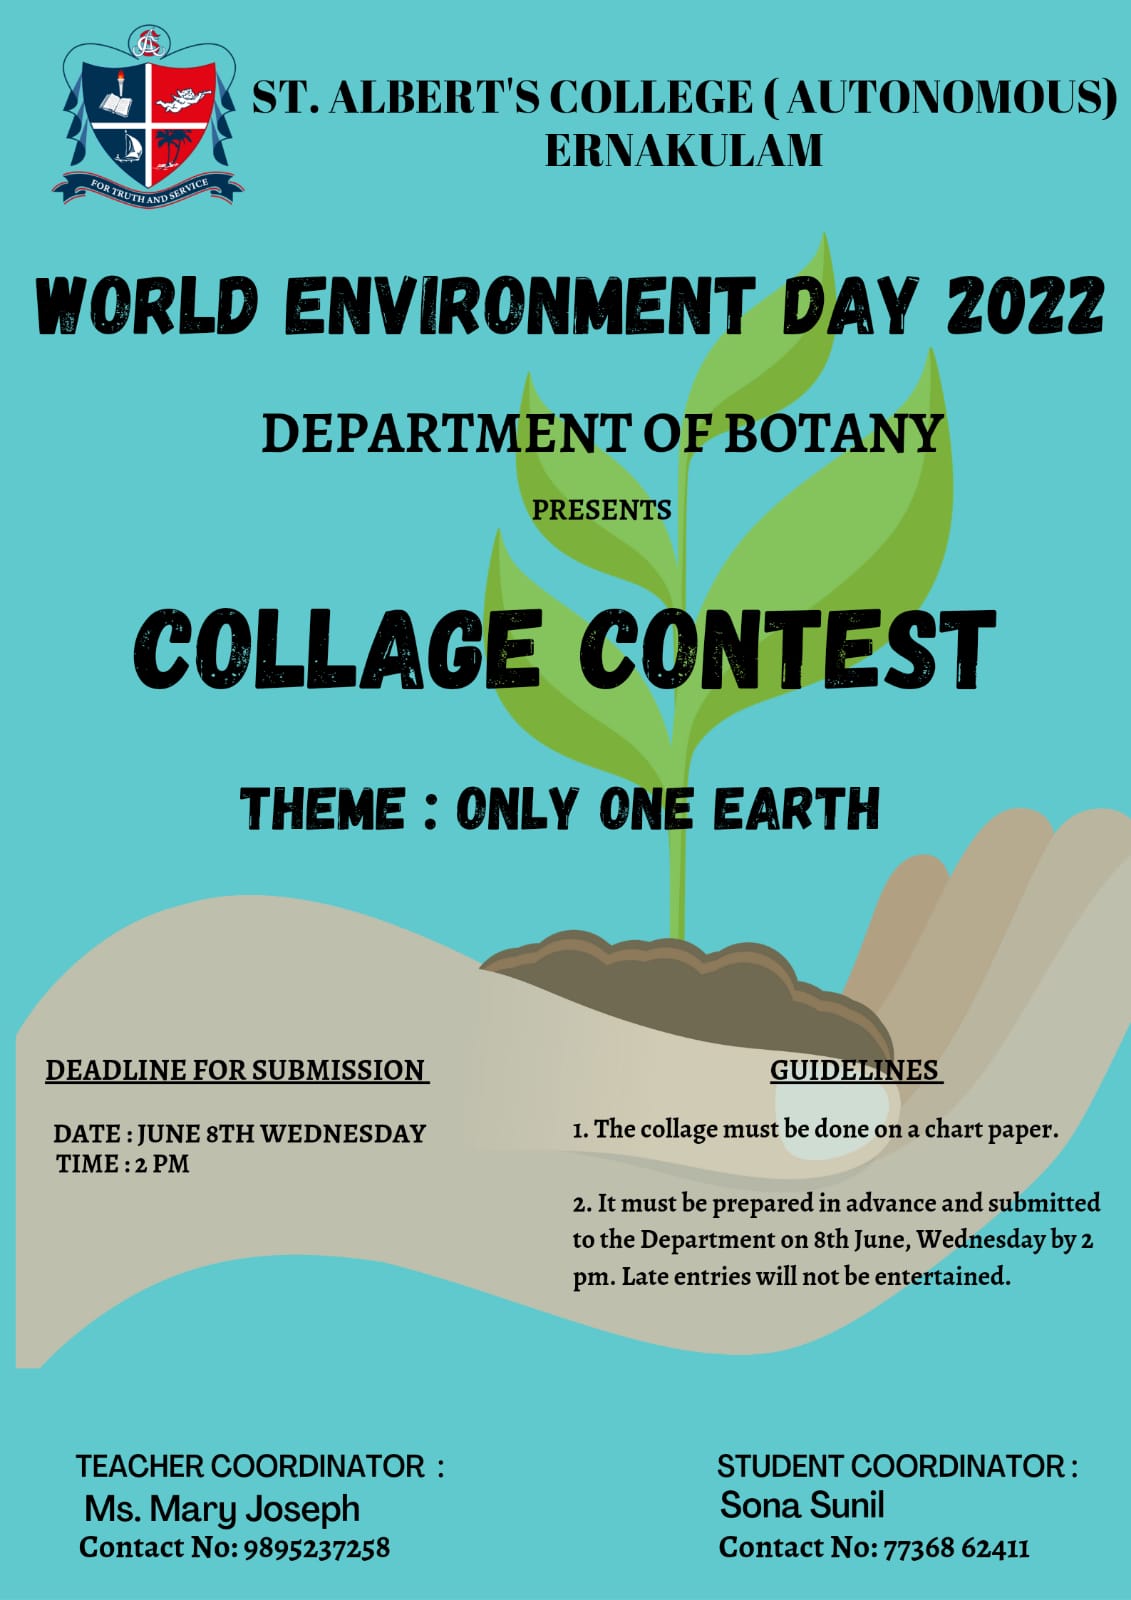 World Environment Day 2022- Collage Contest- “Only One Earth”